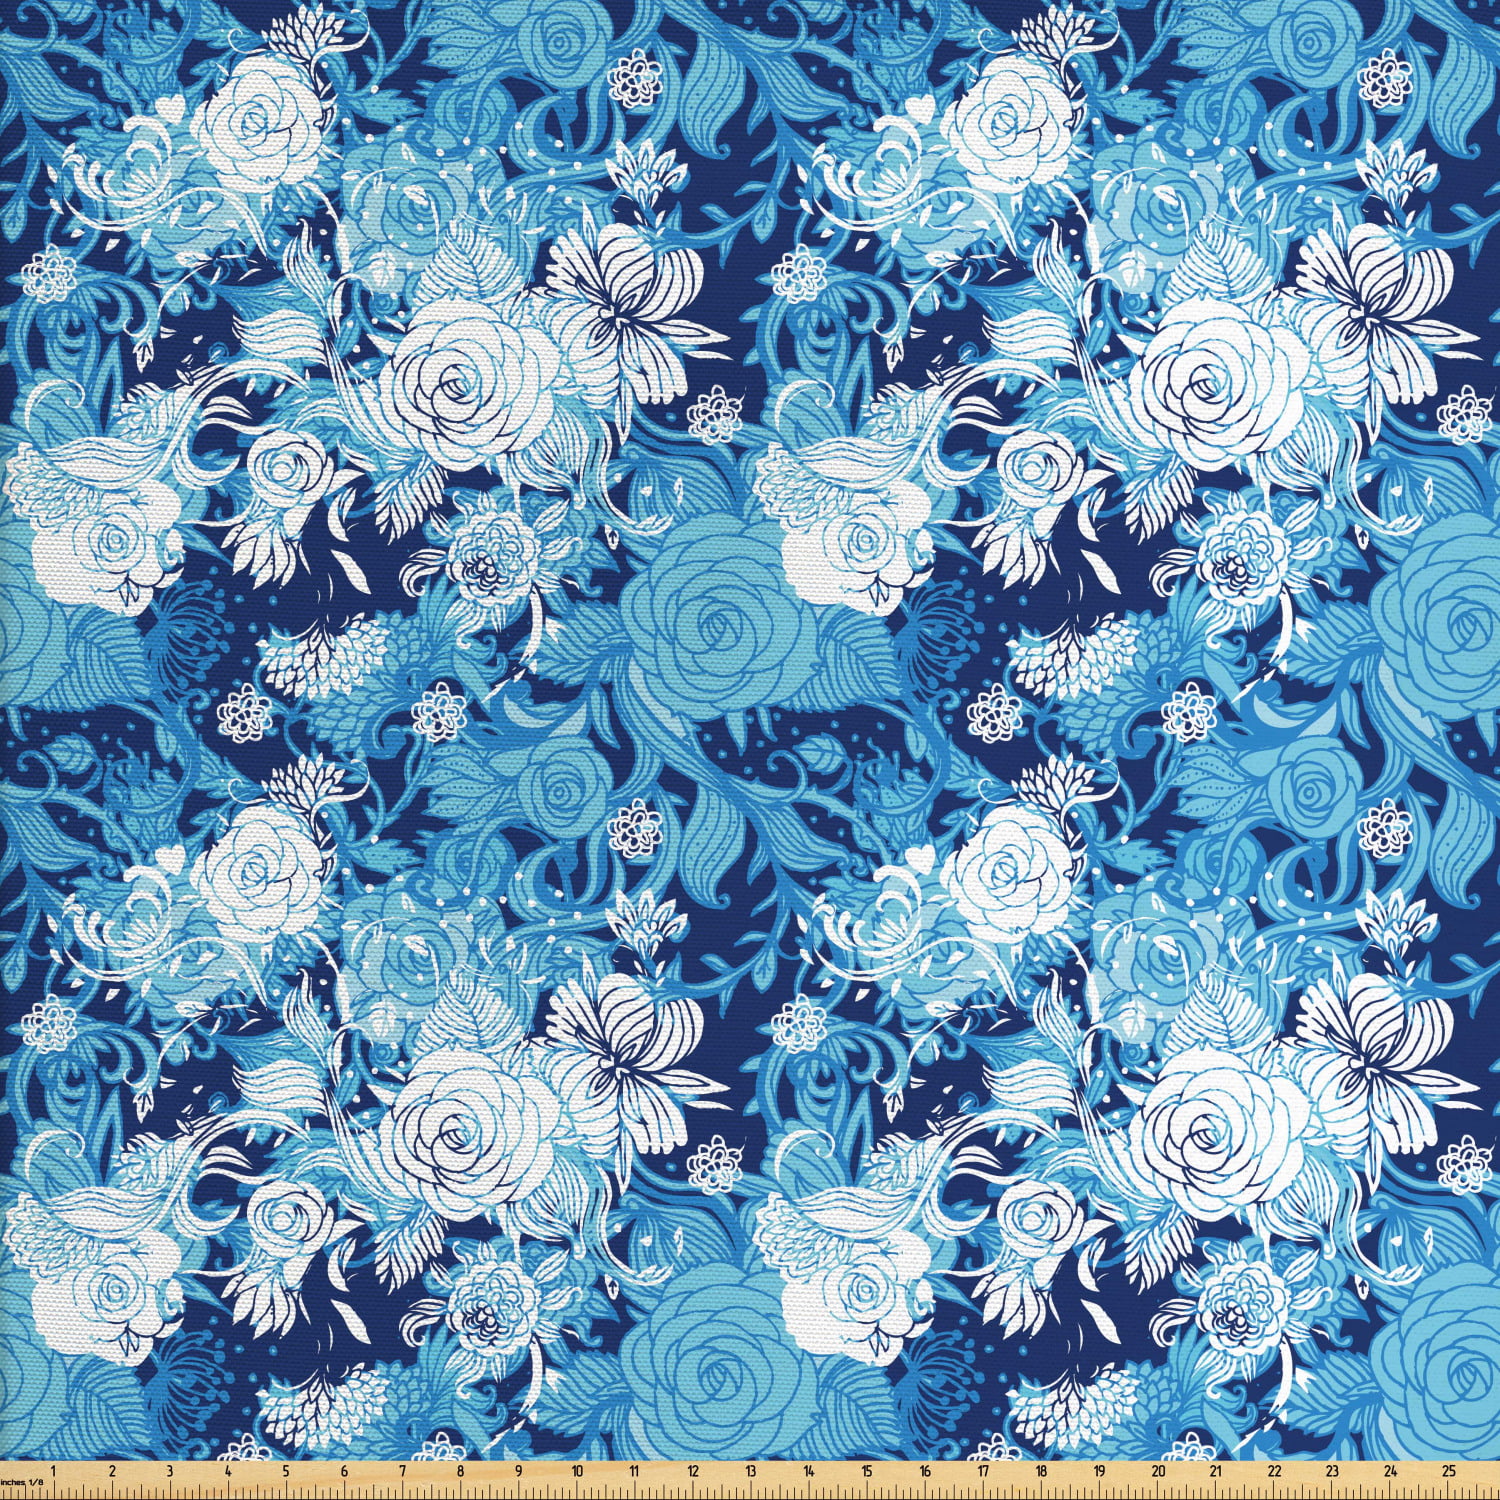 Albums 101+ Pictures Blue And White Floral Wallpaper Excellent